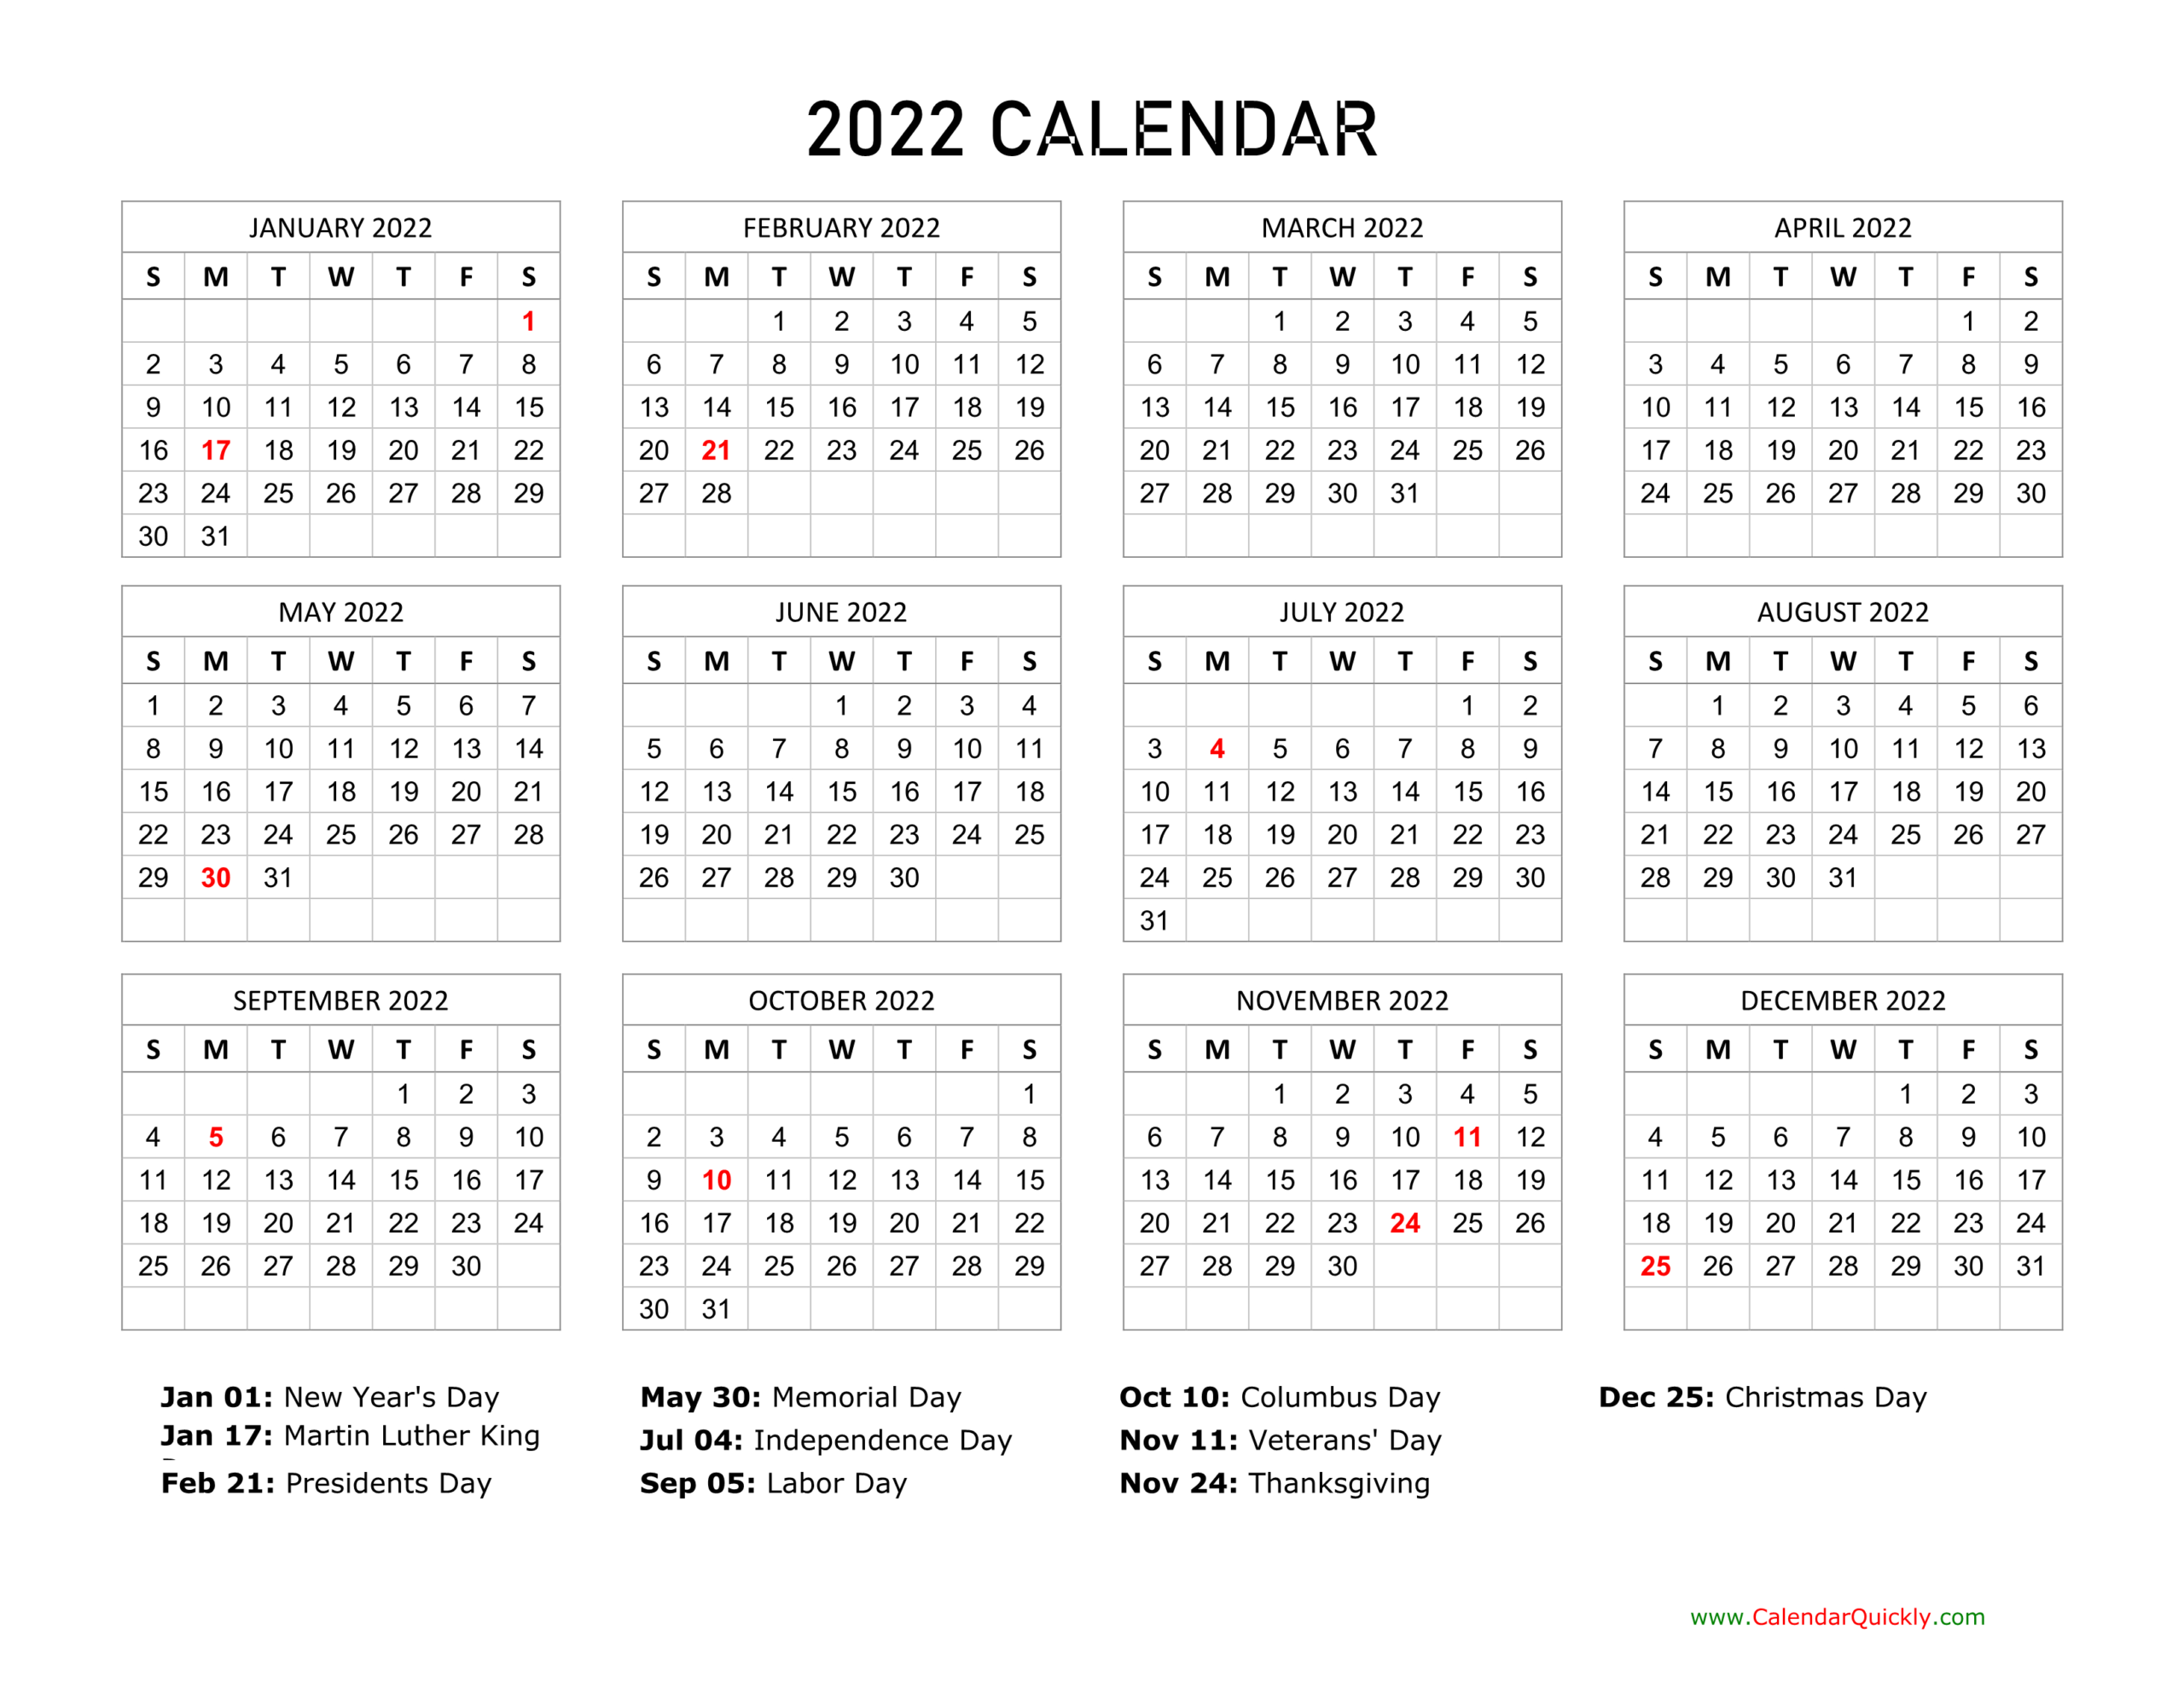 Us Federal Holidays 2022 Calendar / 2022 Calendar - It Will Take You To-Bank Holiday Calendar For 2022